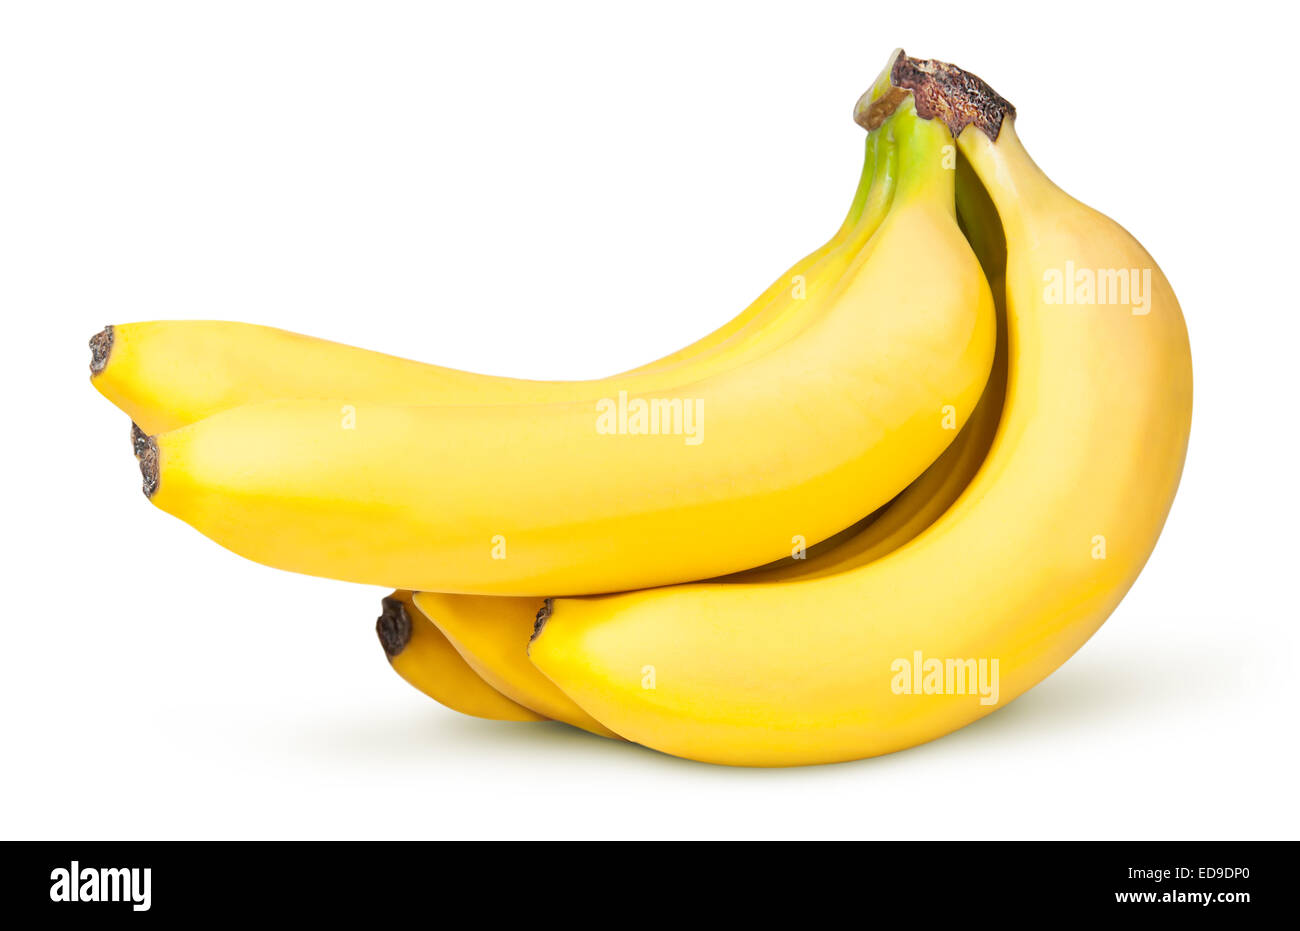 Bunch Of Bananas Upend Isolated On White Background Stock Photo